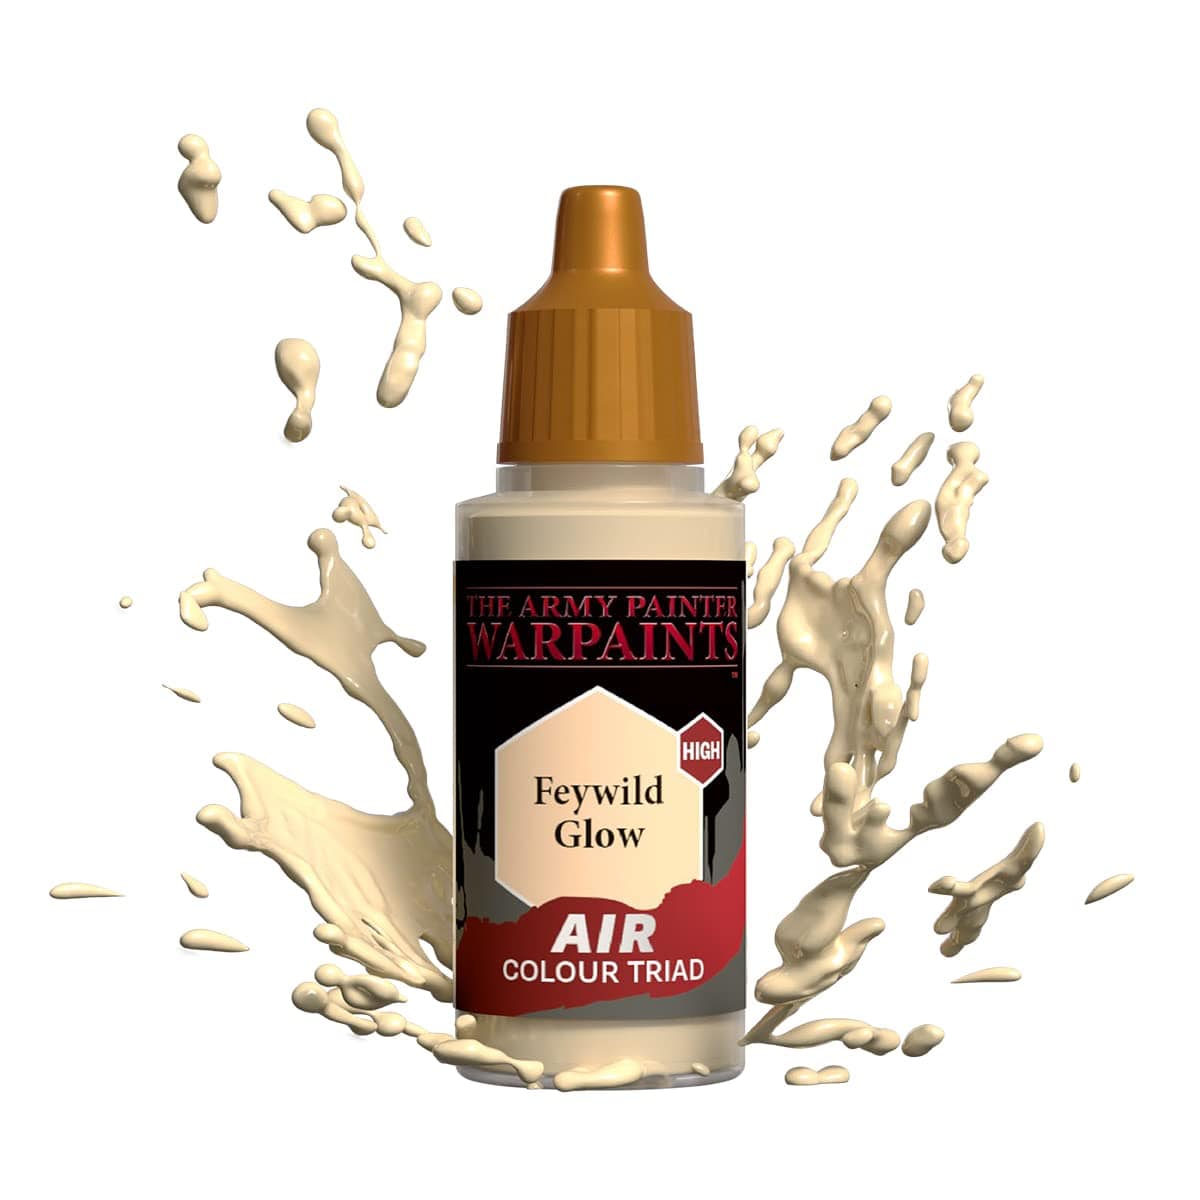 The Army Painter Accessories The Army Painter Warpaints Air: Feywild Glow 18ml